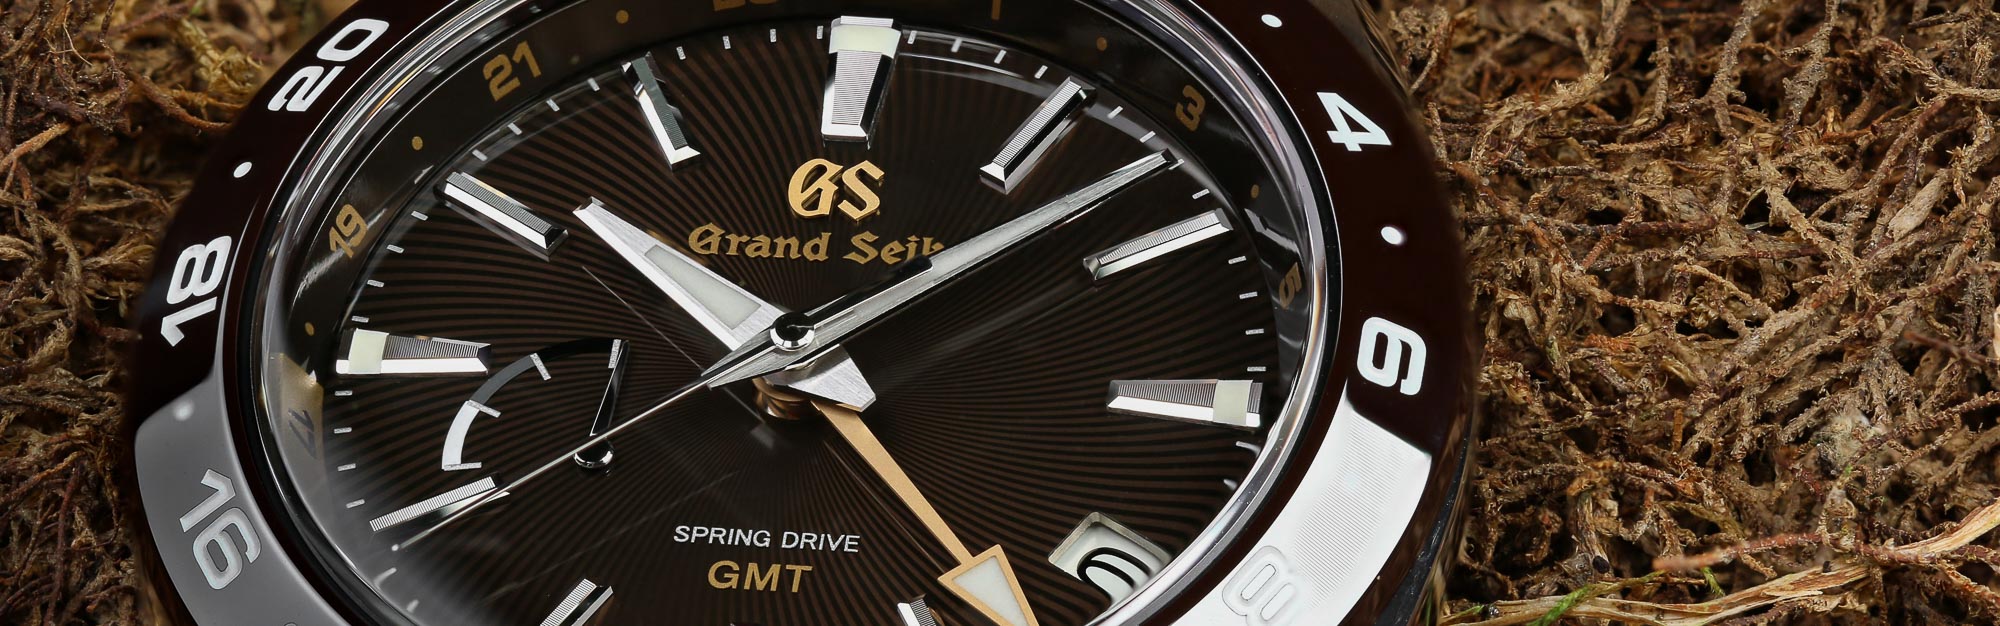 Grand Seiko SBGE263 brown dial sport watch with yellow accents.